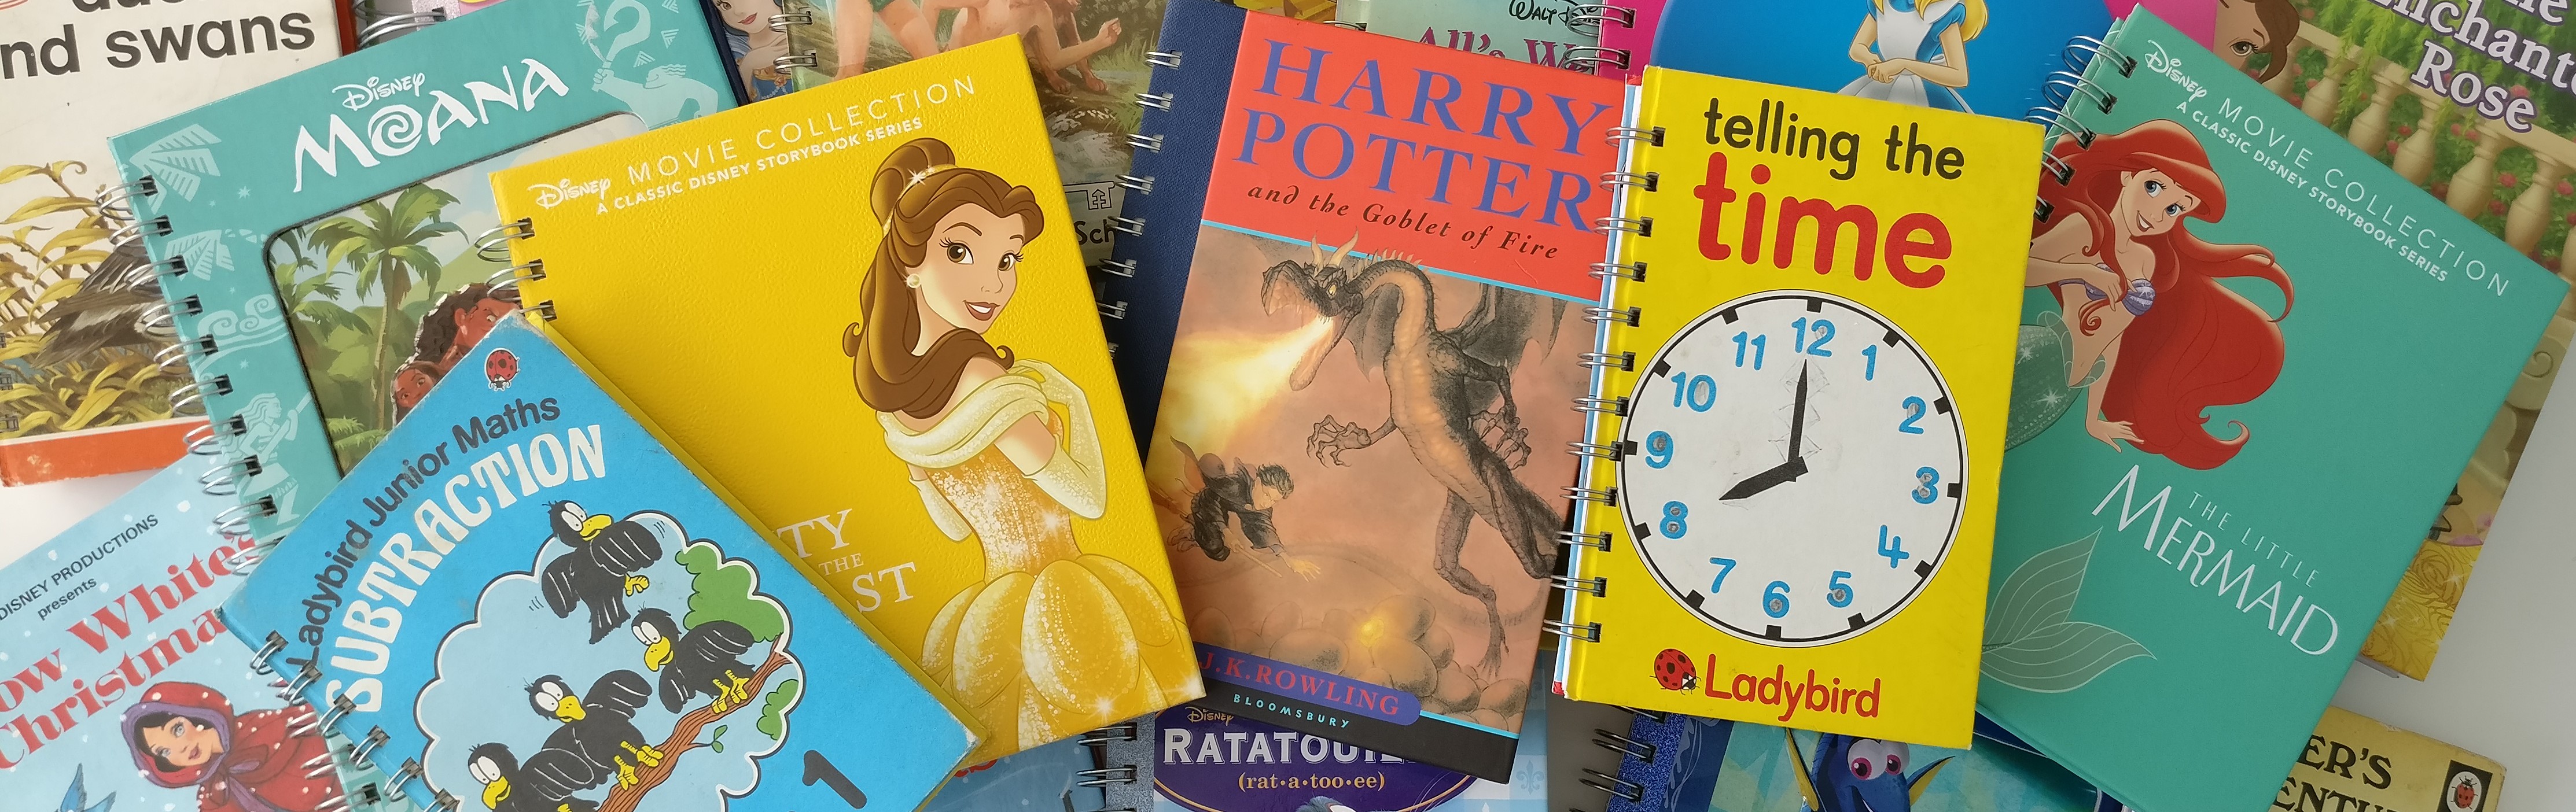 Keep up to date with Retro from Scratch notebooks and workshops in Essex